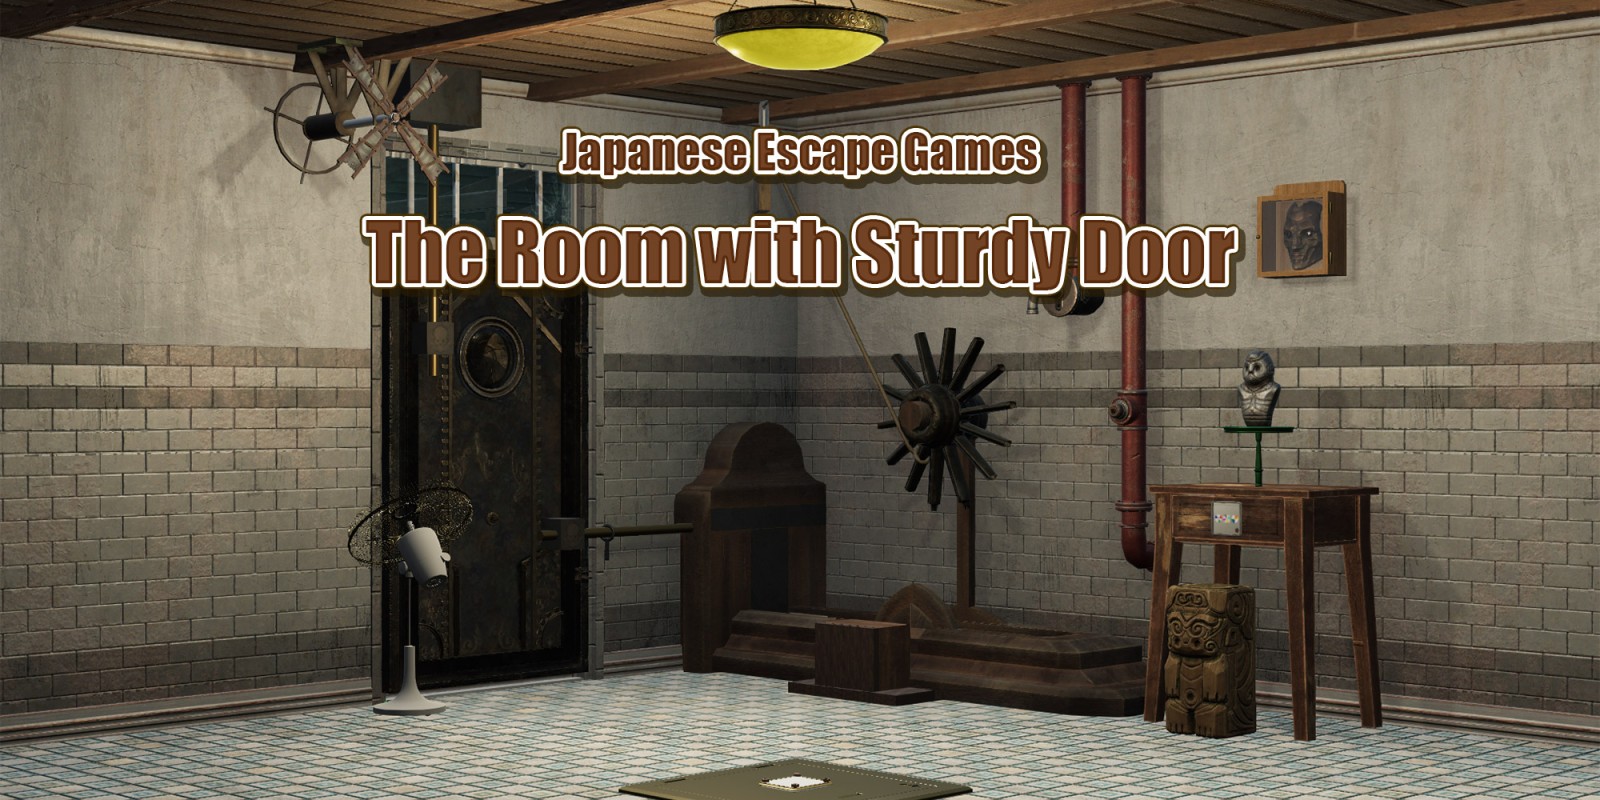 Japanese Escape from The Room with Sturdy Door